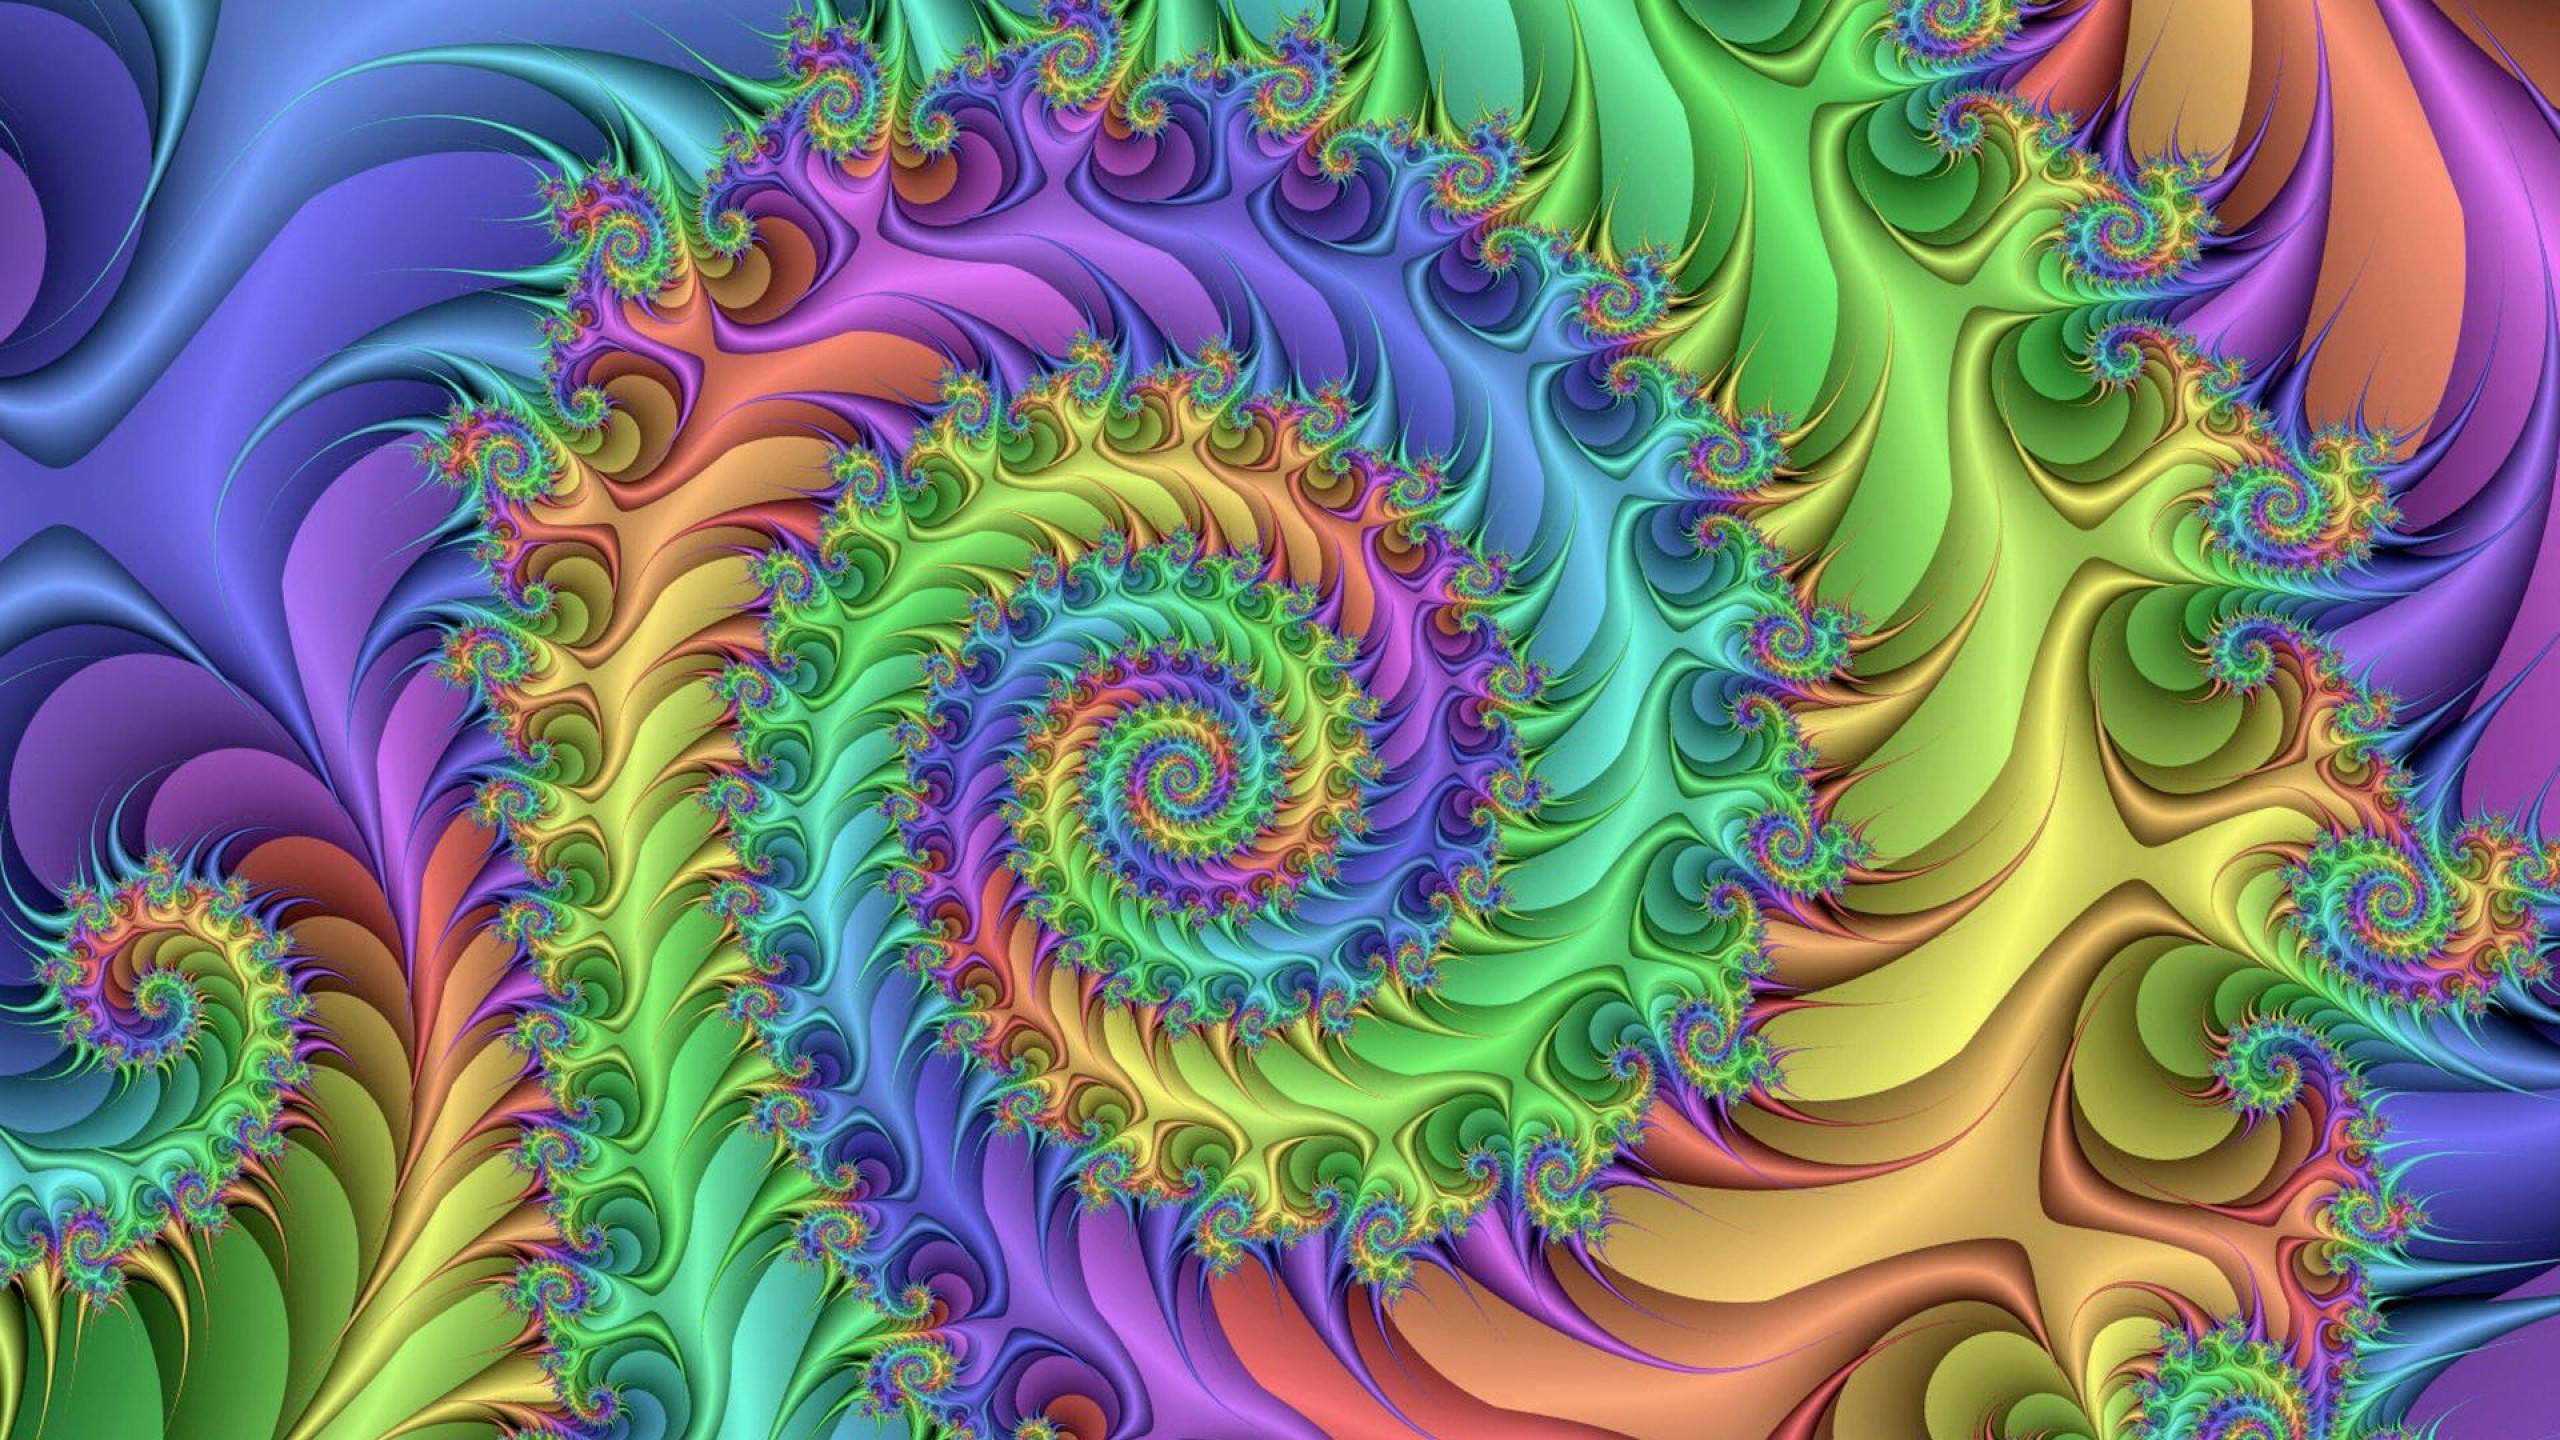 2560x1440 1920x1200 psychedelic and trippy best wallpaper hd wallpapers high  definition amazing cool desktop wallpapers for windows apple mac free  1920Ã—1200 ...